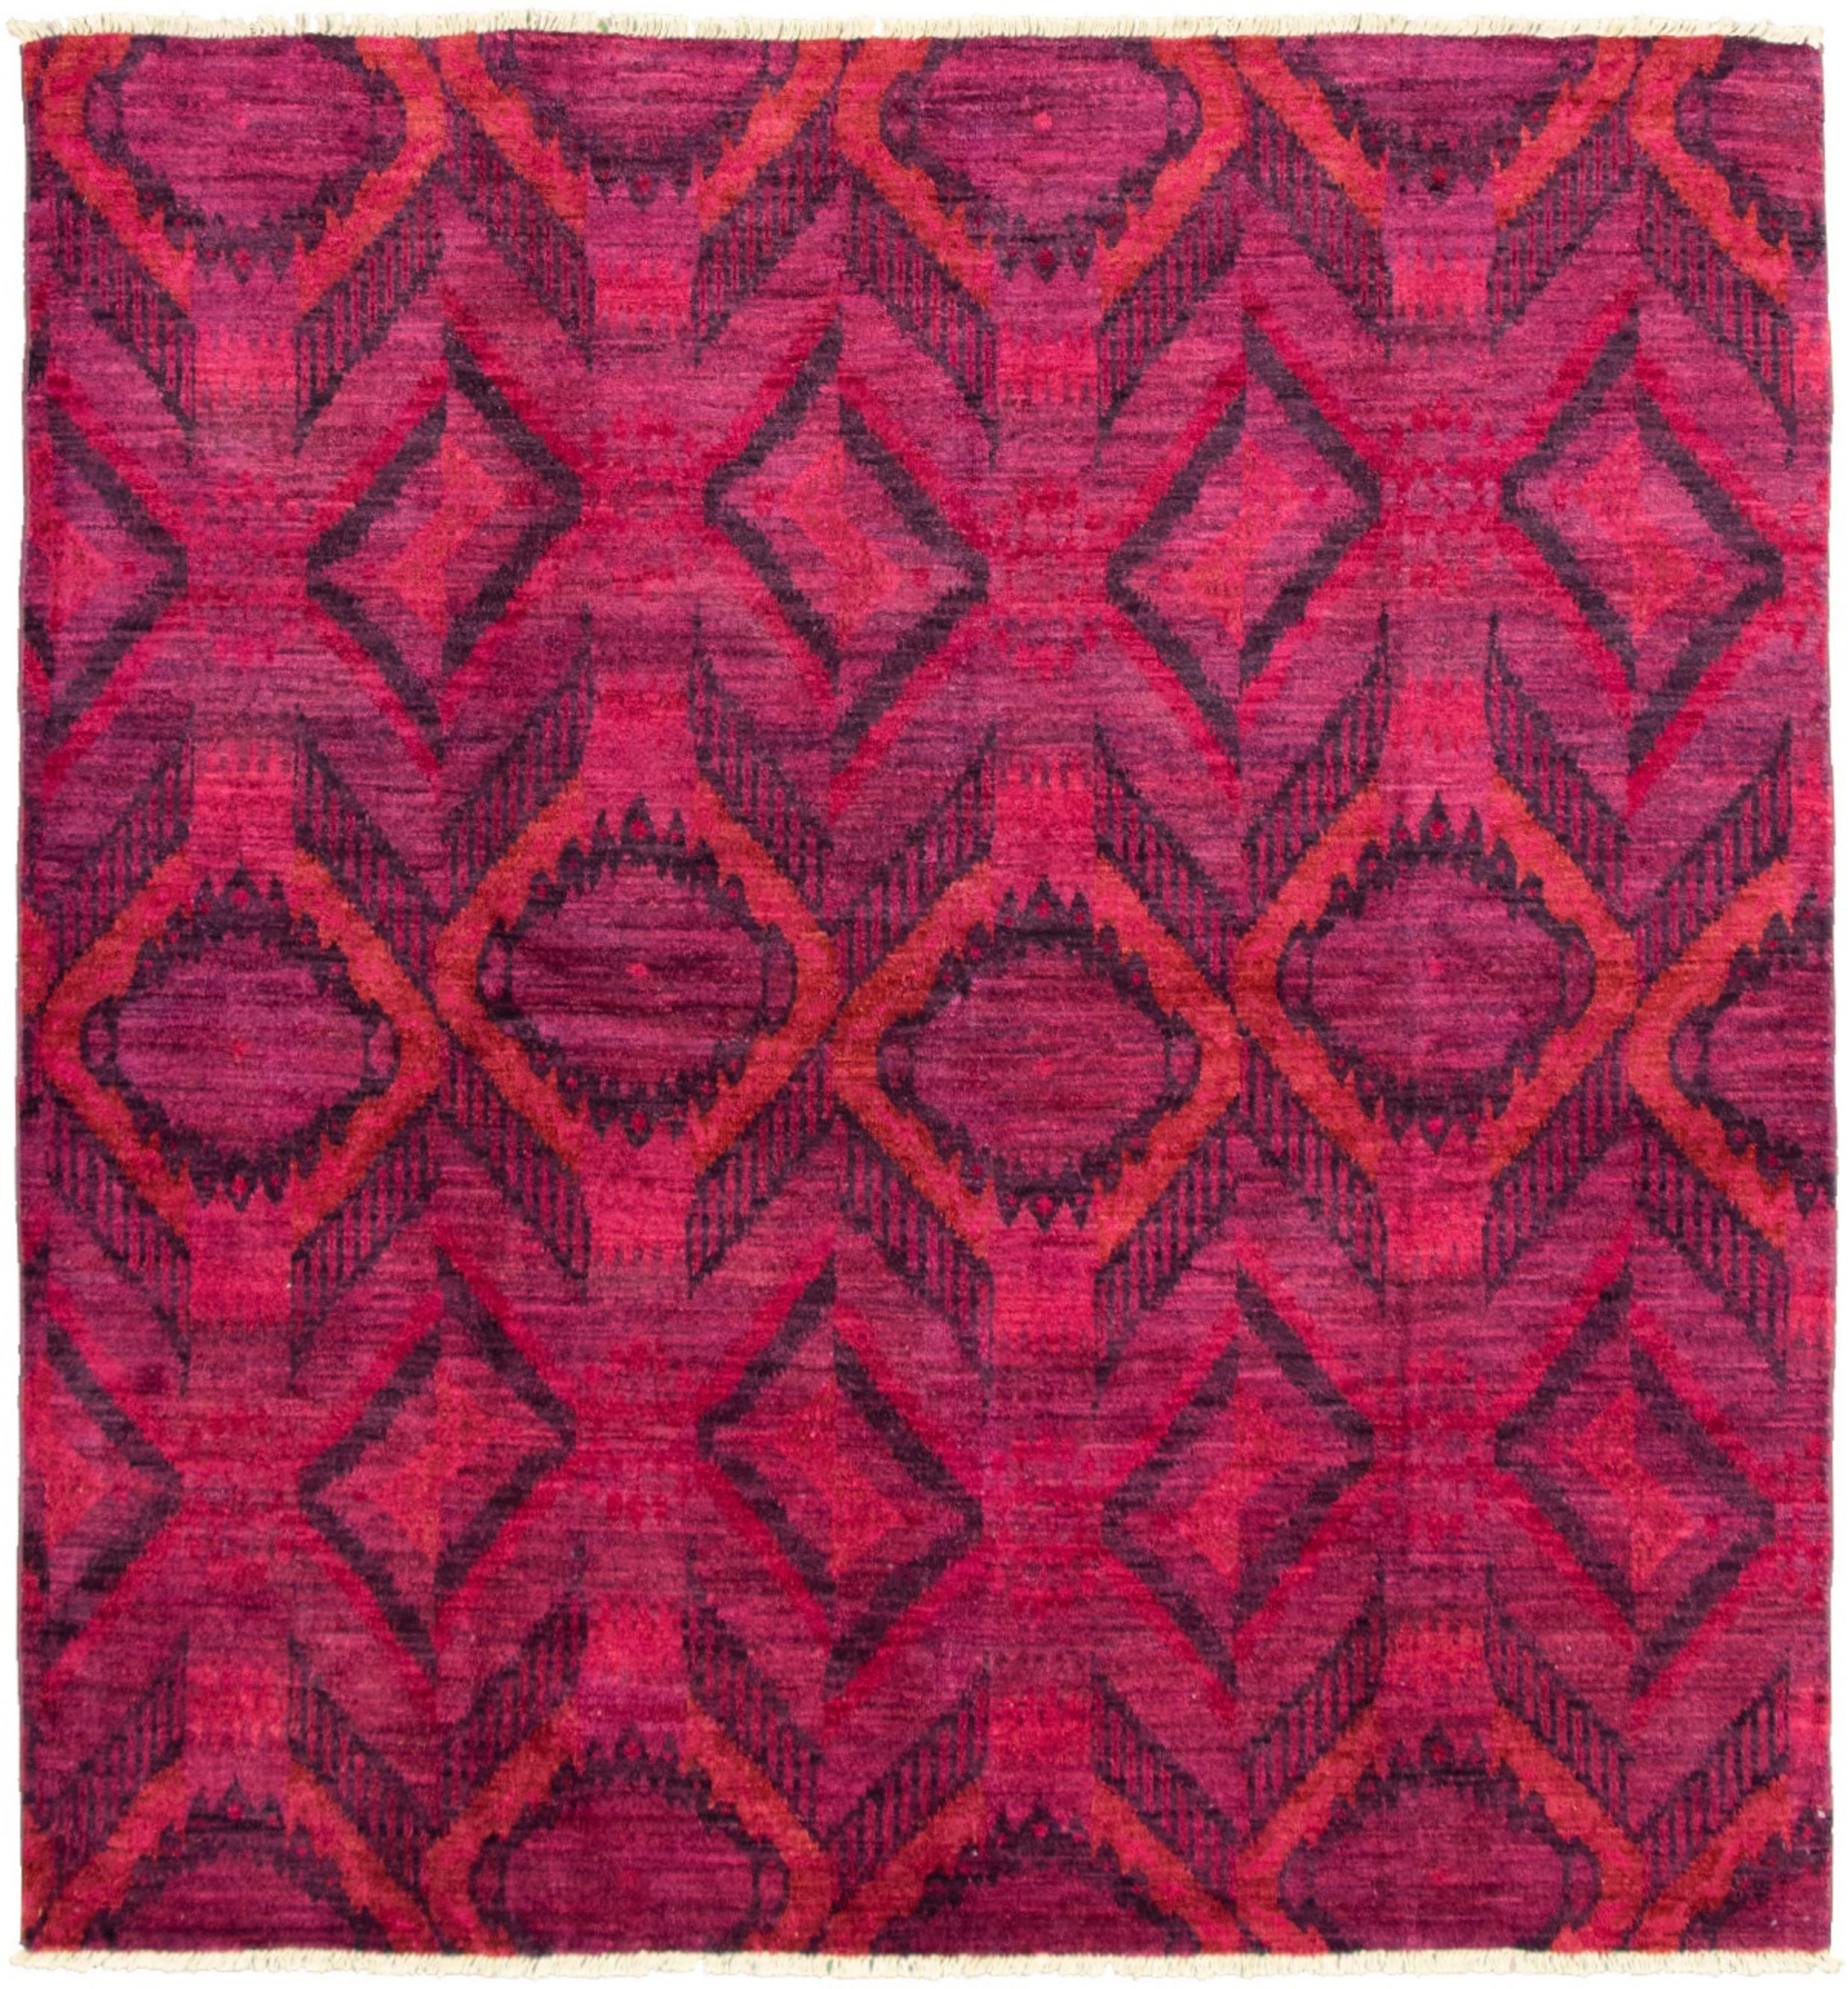 Hand-knotted Tangier Dark Pink Wool Rug 7'10" x 8'4" Size: 7'10" x 8'4"  